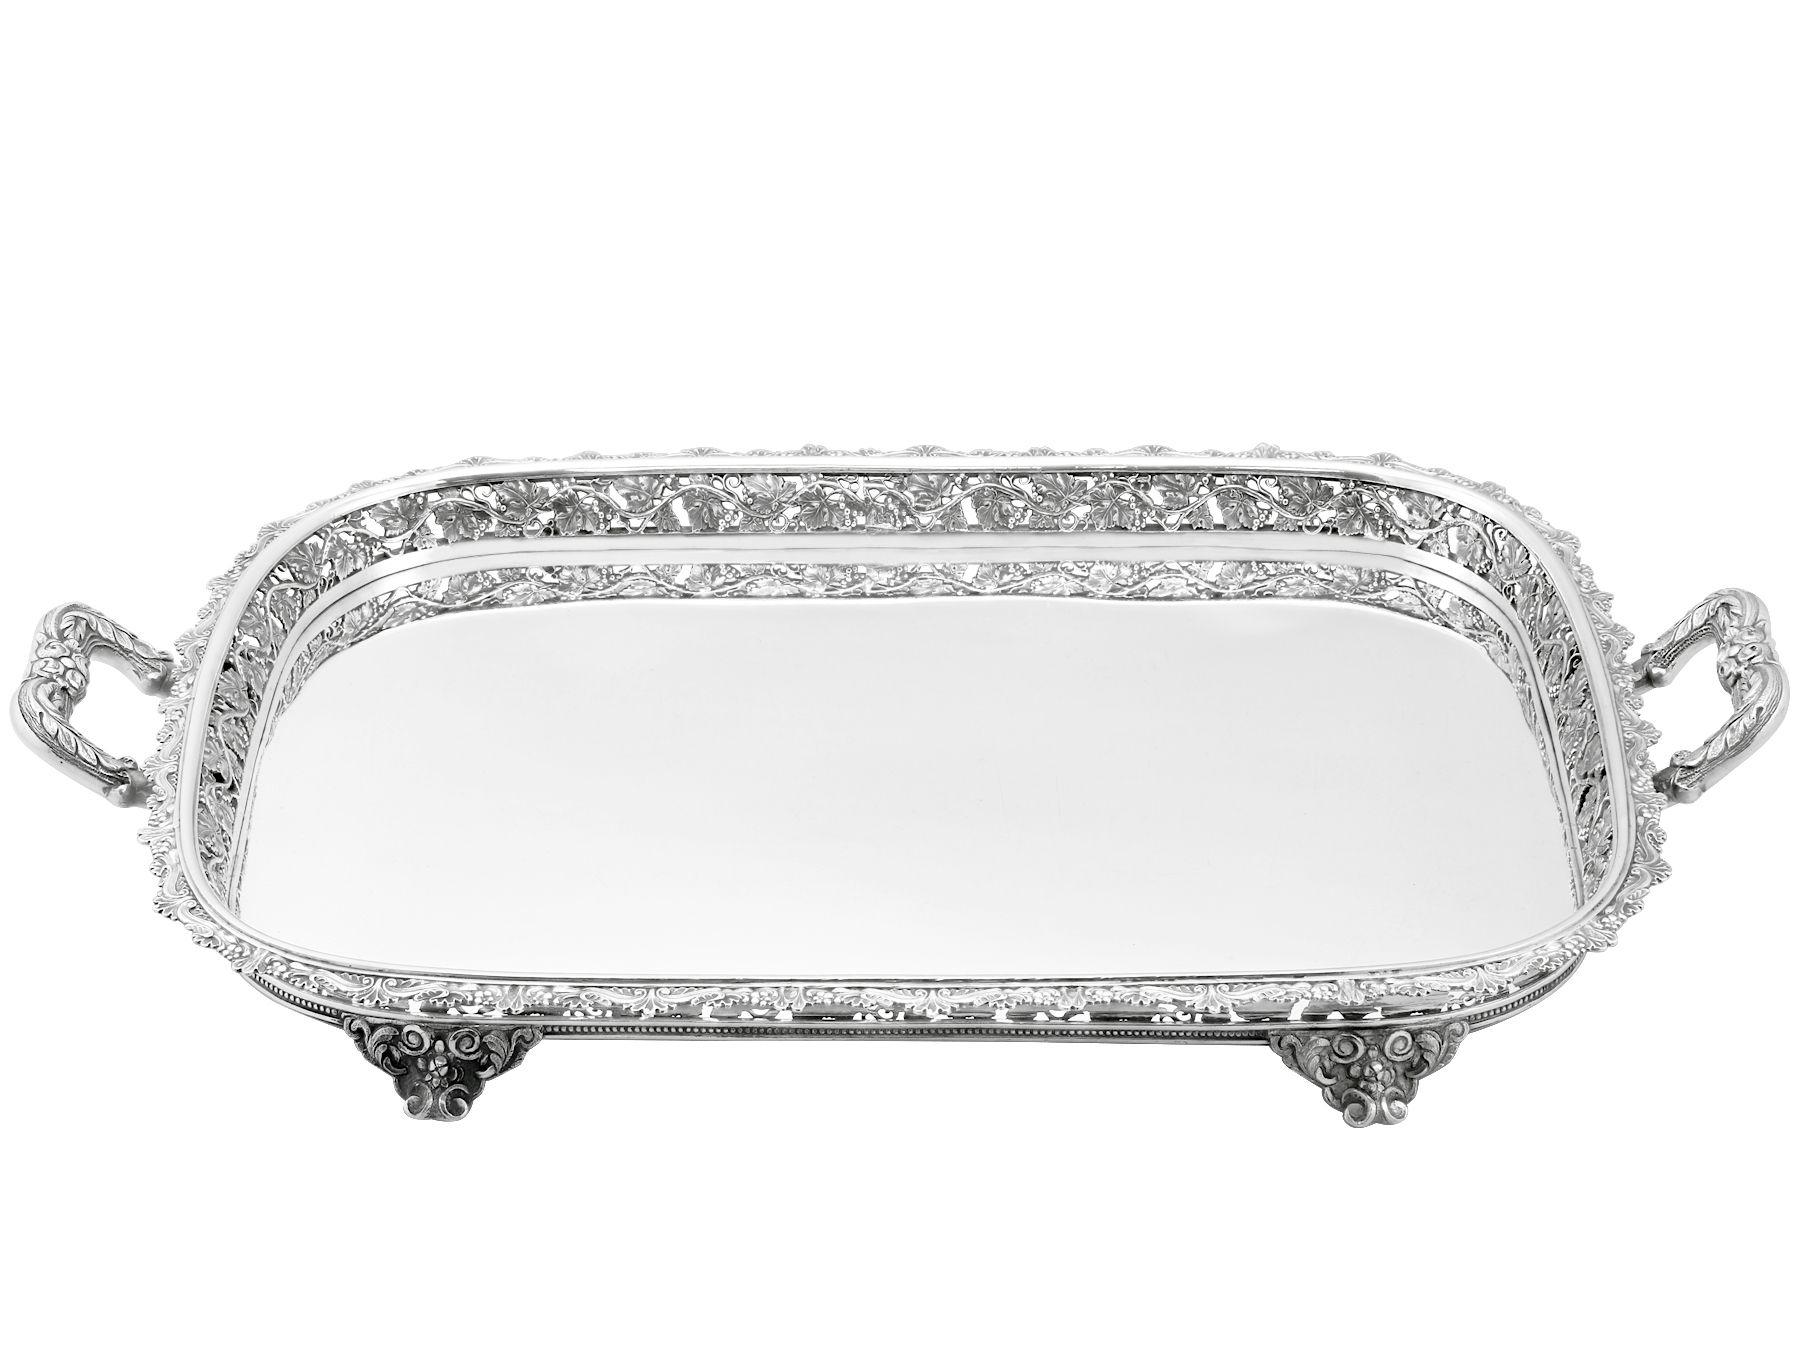 An exceptional, fine and impressive, antique European silver tea tray; an addition to our silverware collection.

This exceptional antique silver tray has a rectangular rounded form.

The surface of this antique tray is plain and